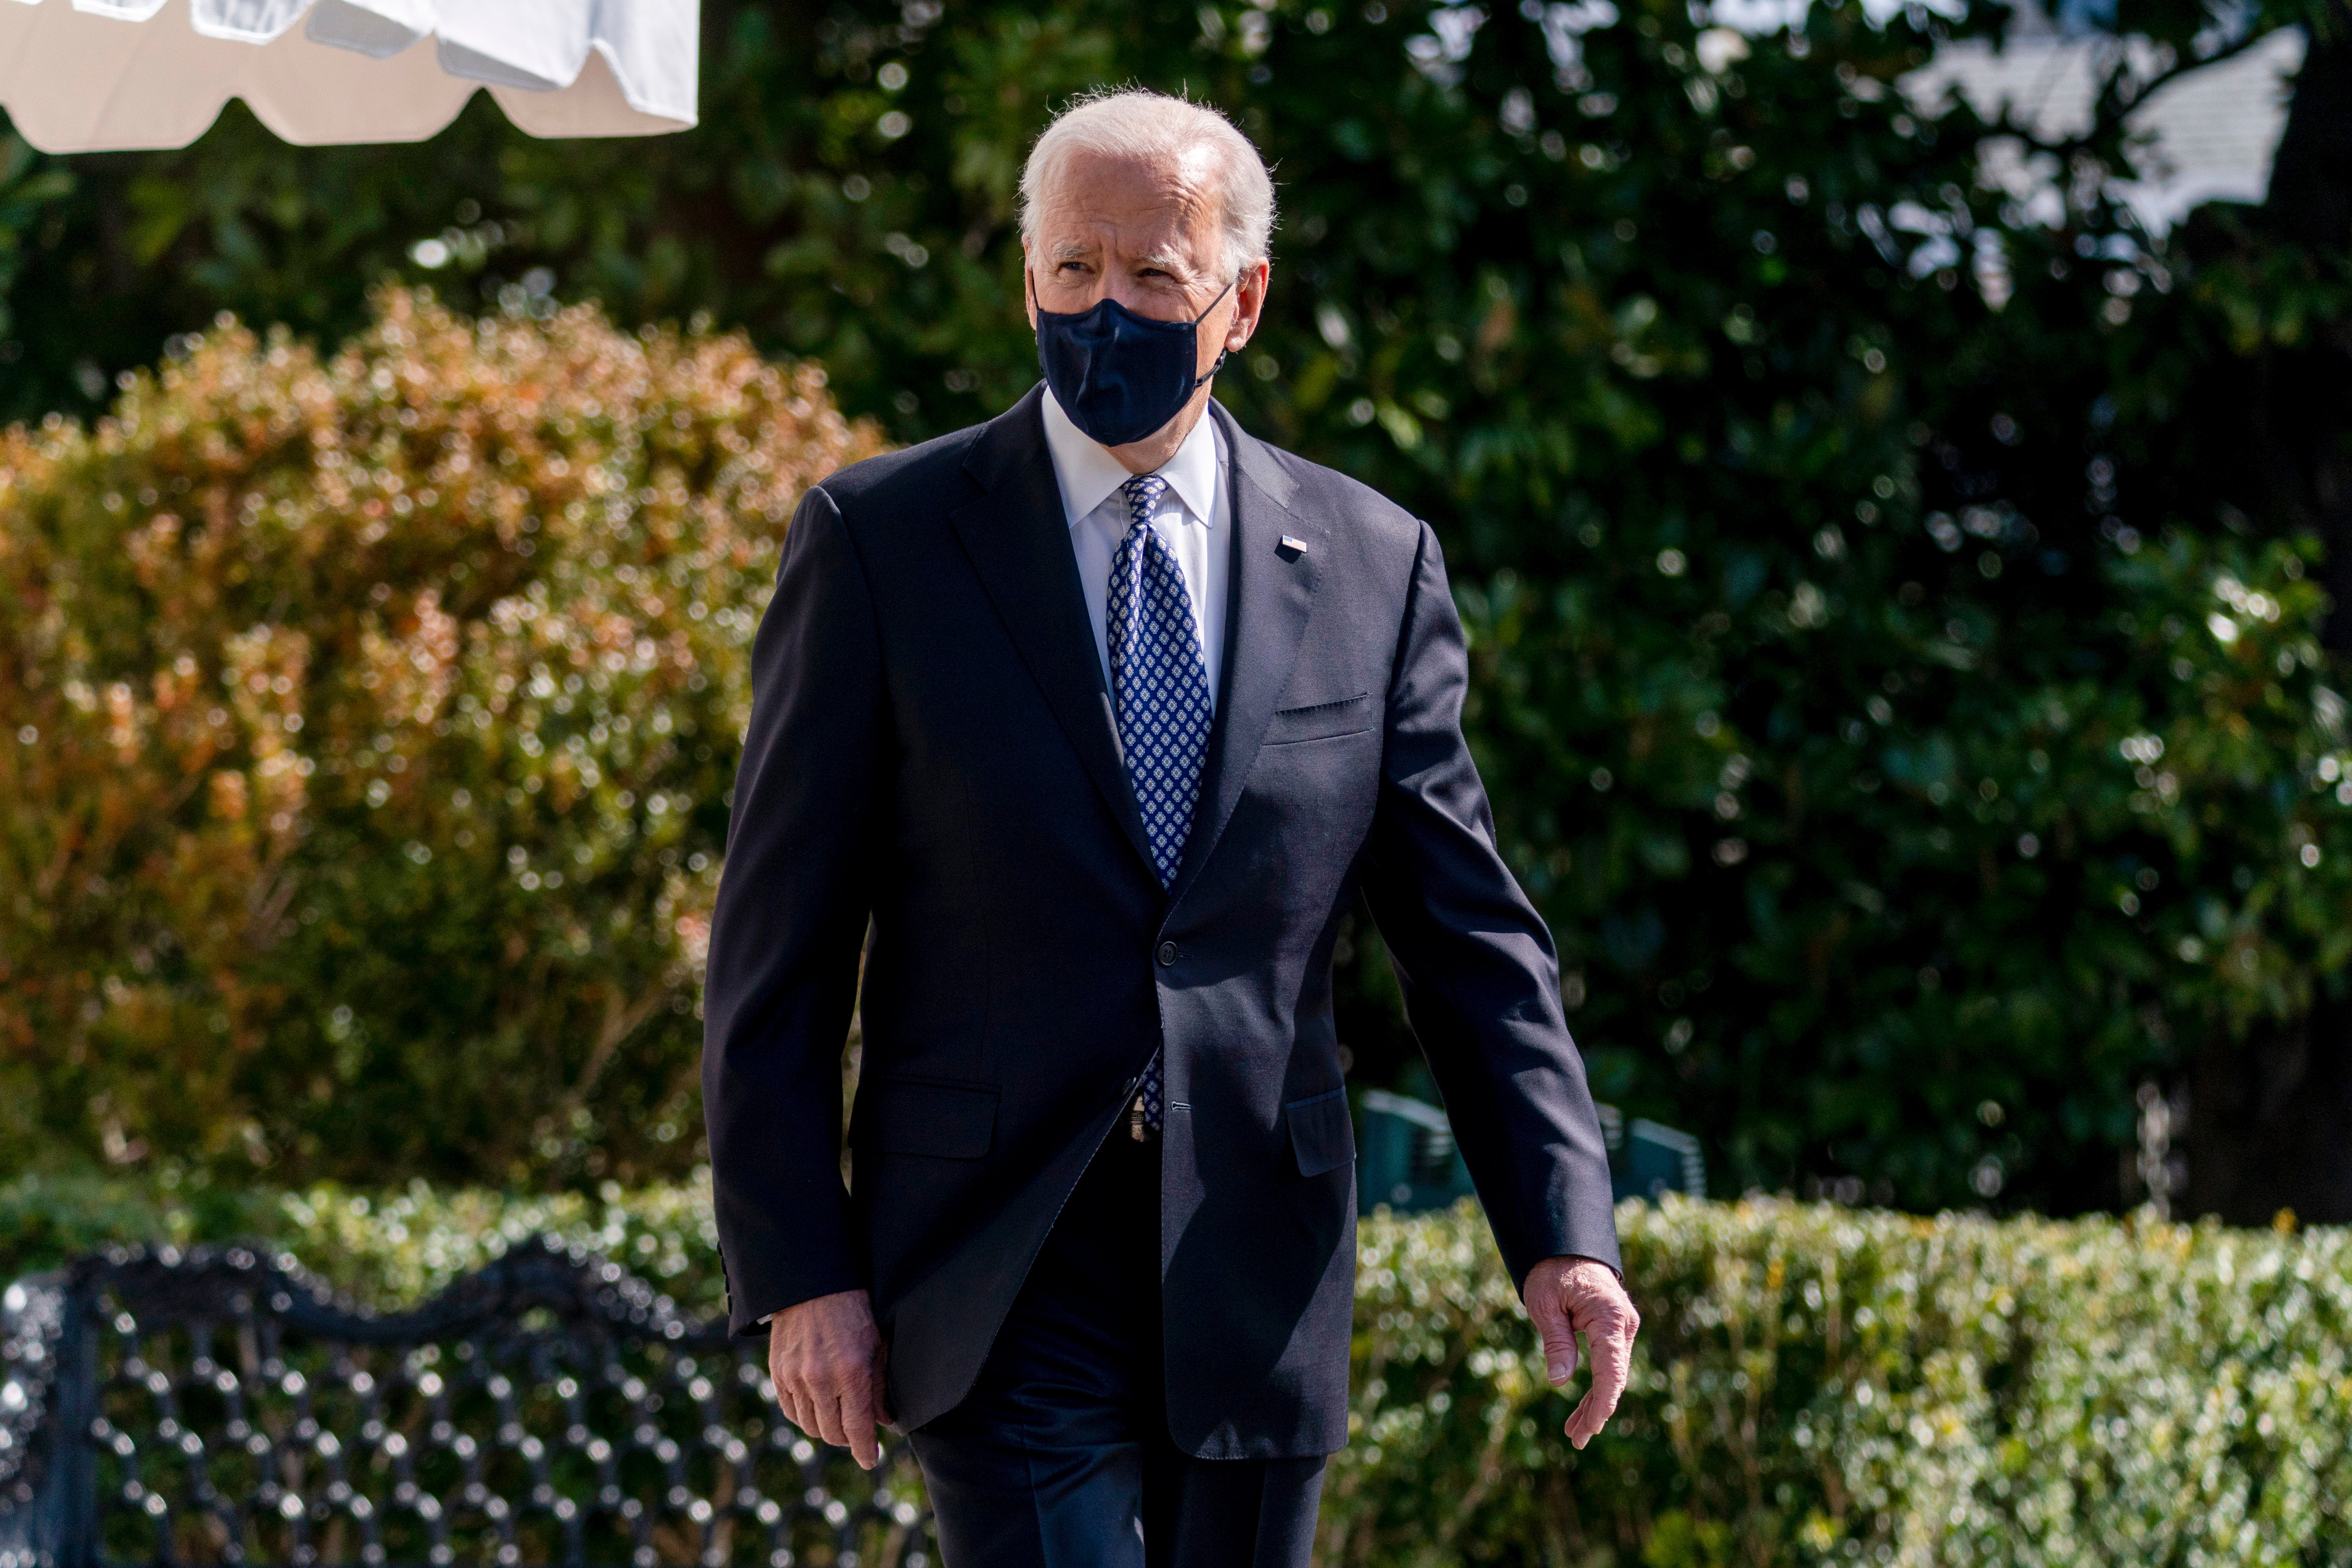 President Joe Biden has made plain that American policy is driven by American interests